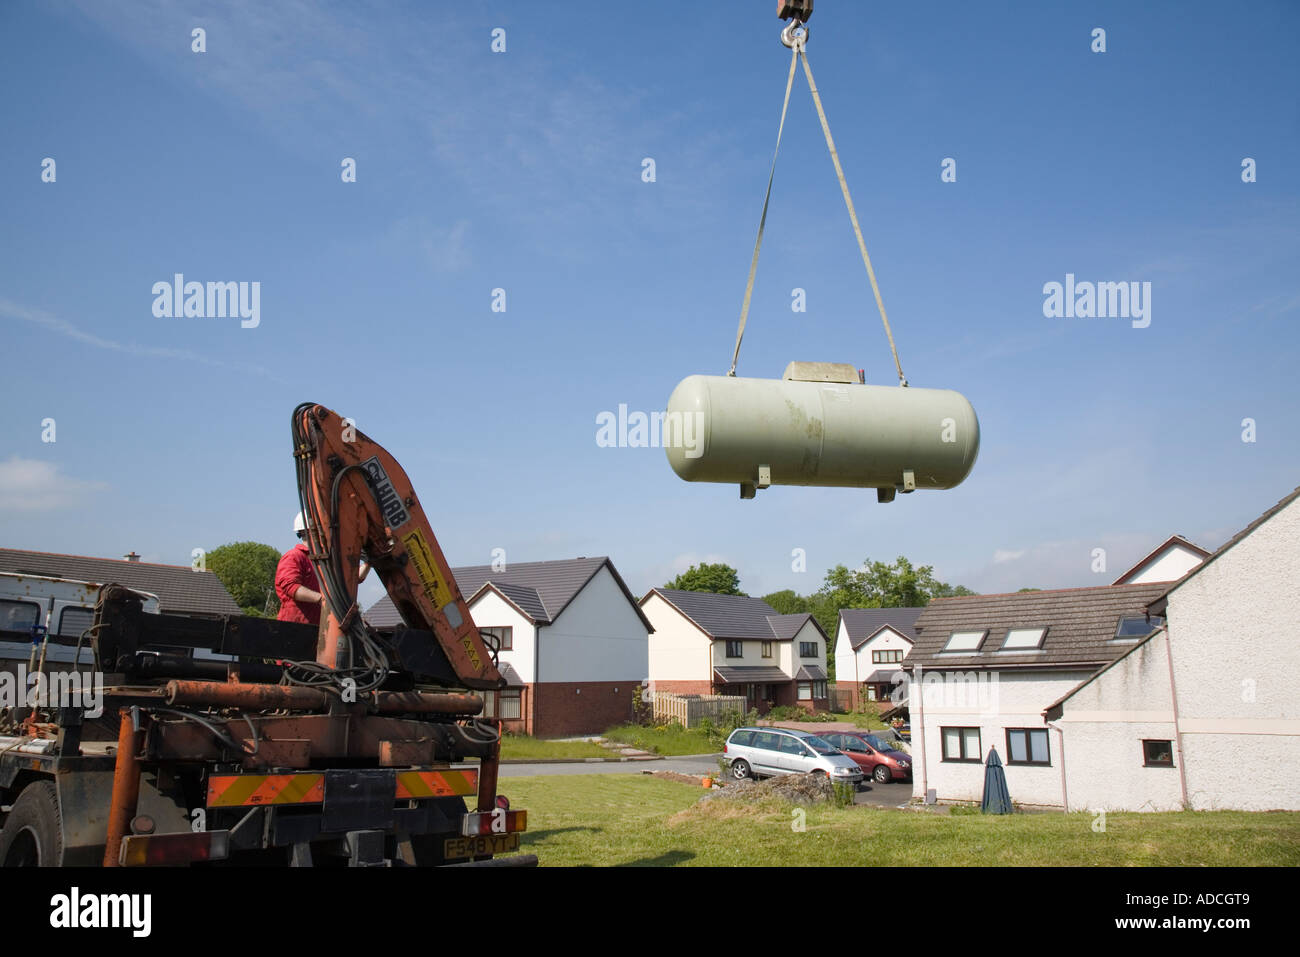 Large Calor gas tank being hoisted by a crane from a garden to a lorry against blue sky. UK Britain Stock Photo